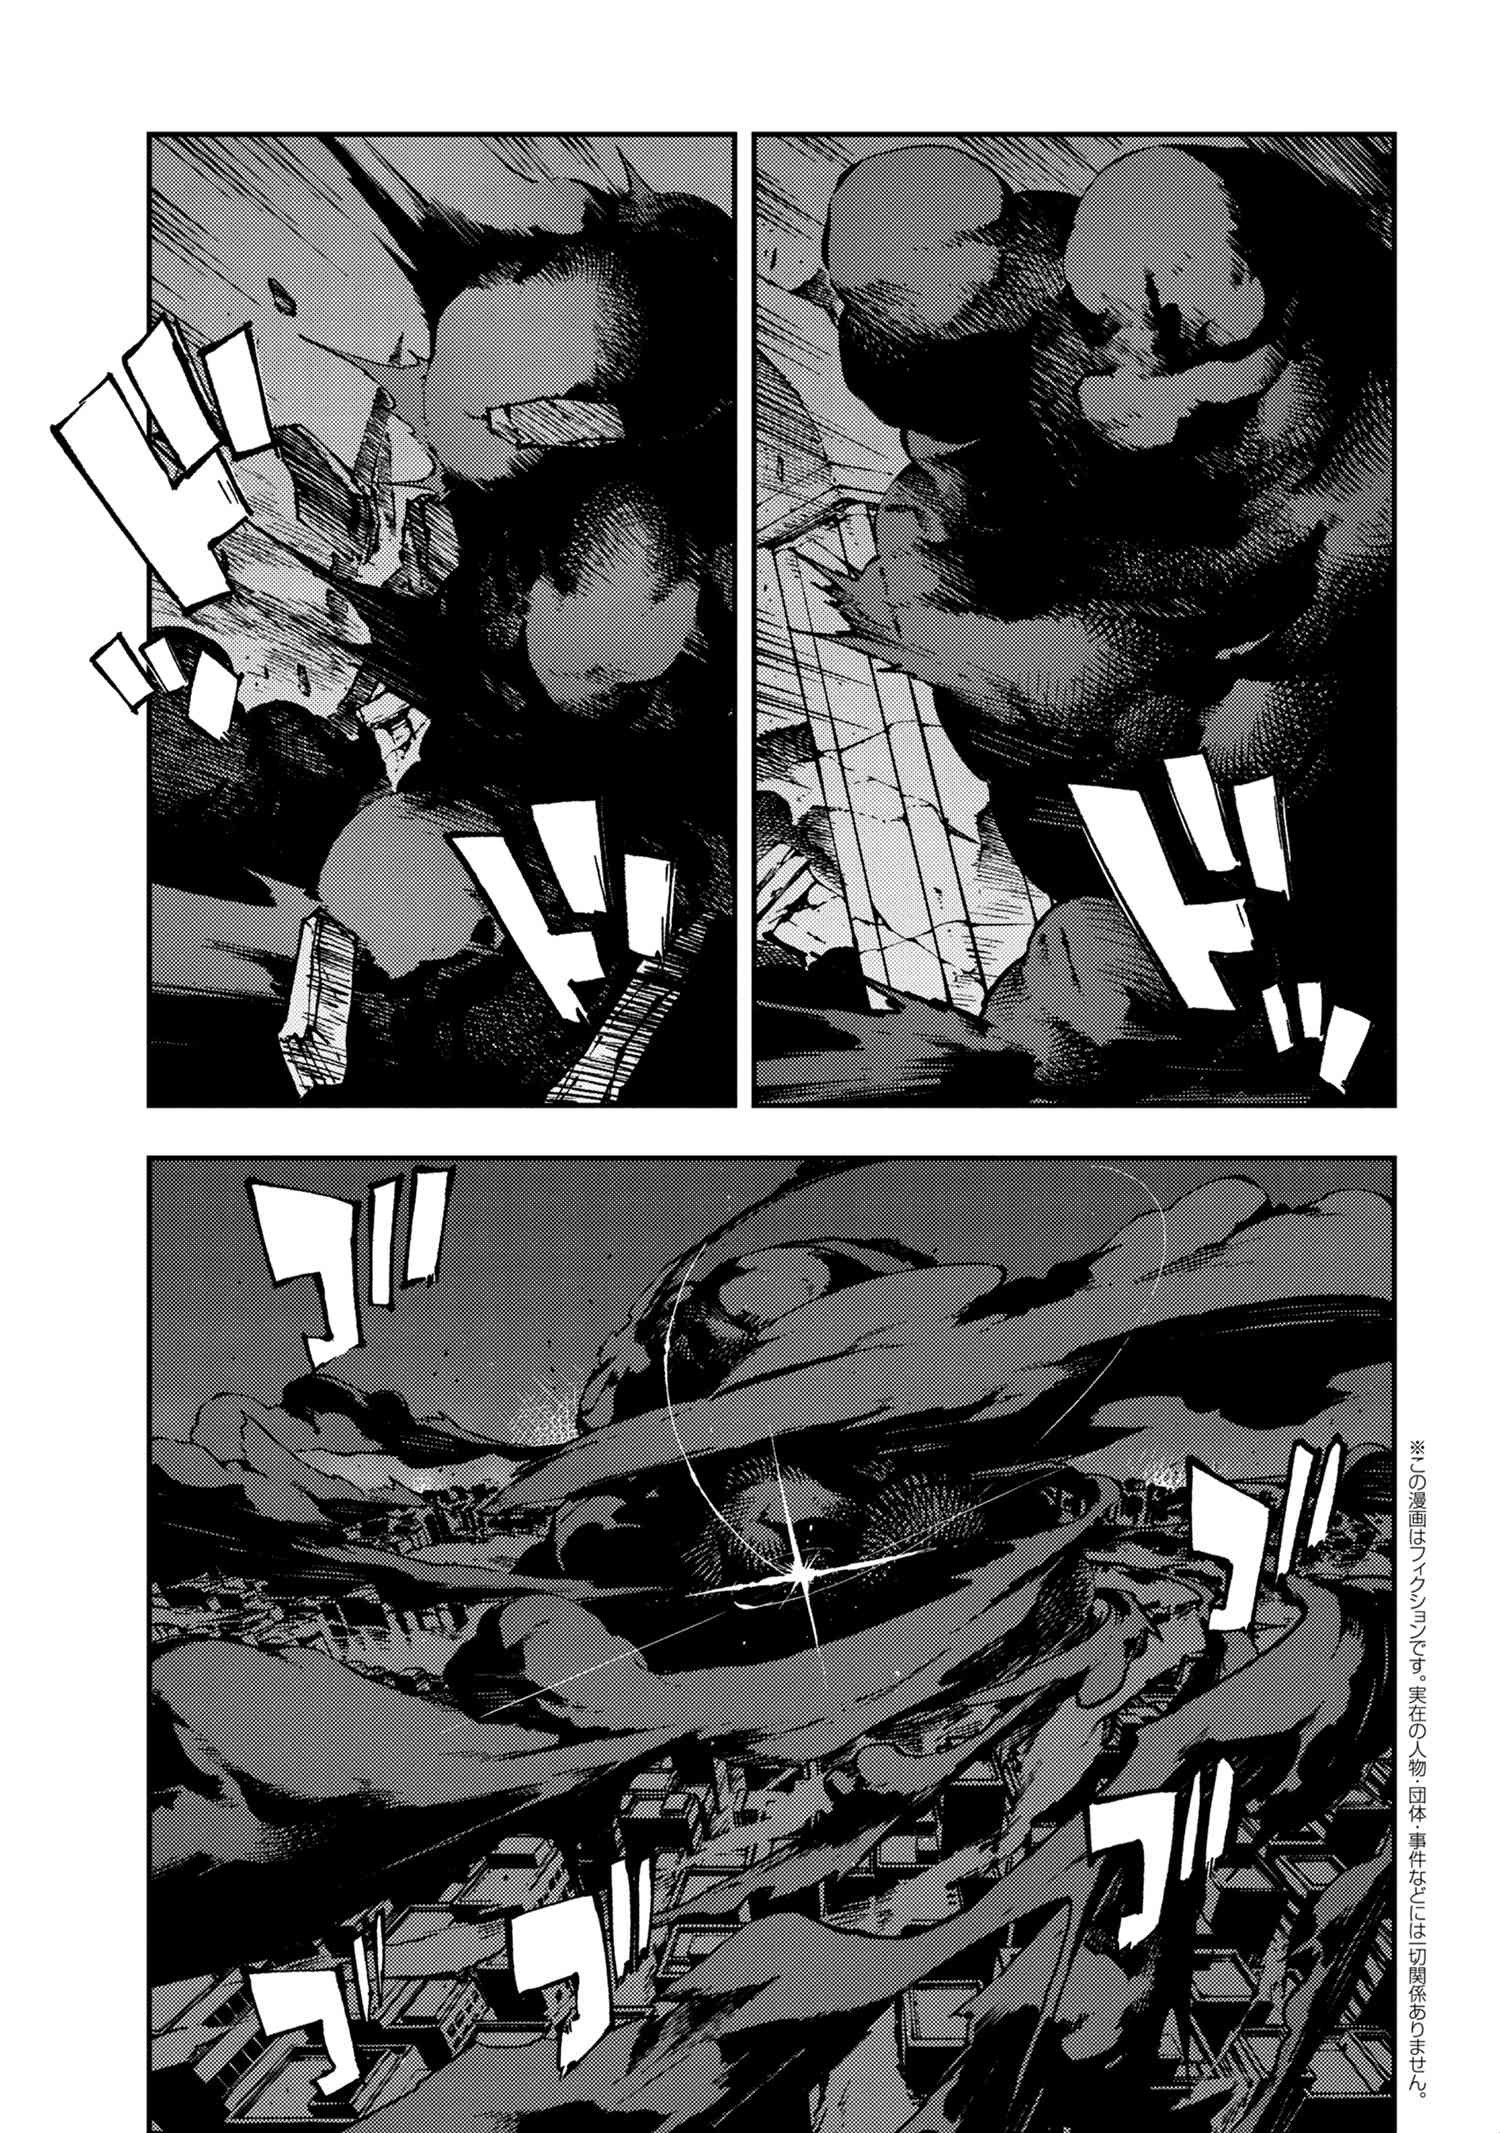 Bungou Stray Dogs: Dead Apple - Chapter 14-2 - Page 2